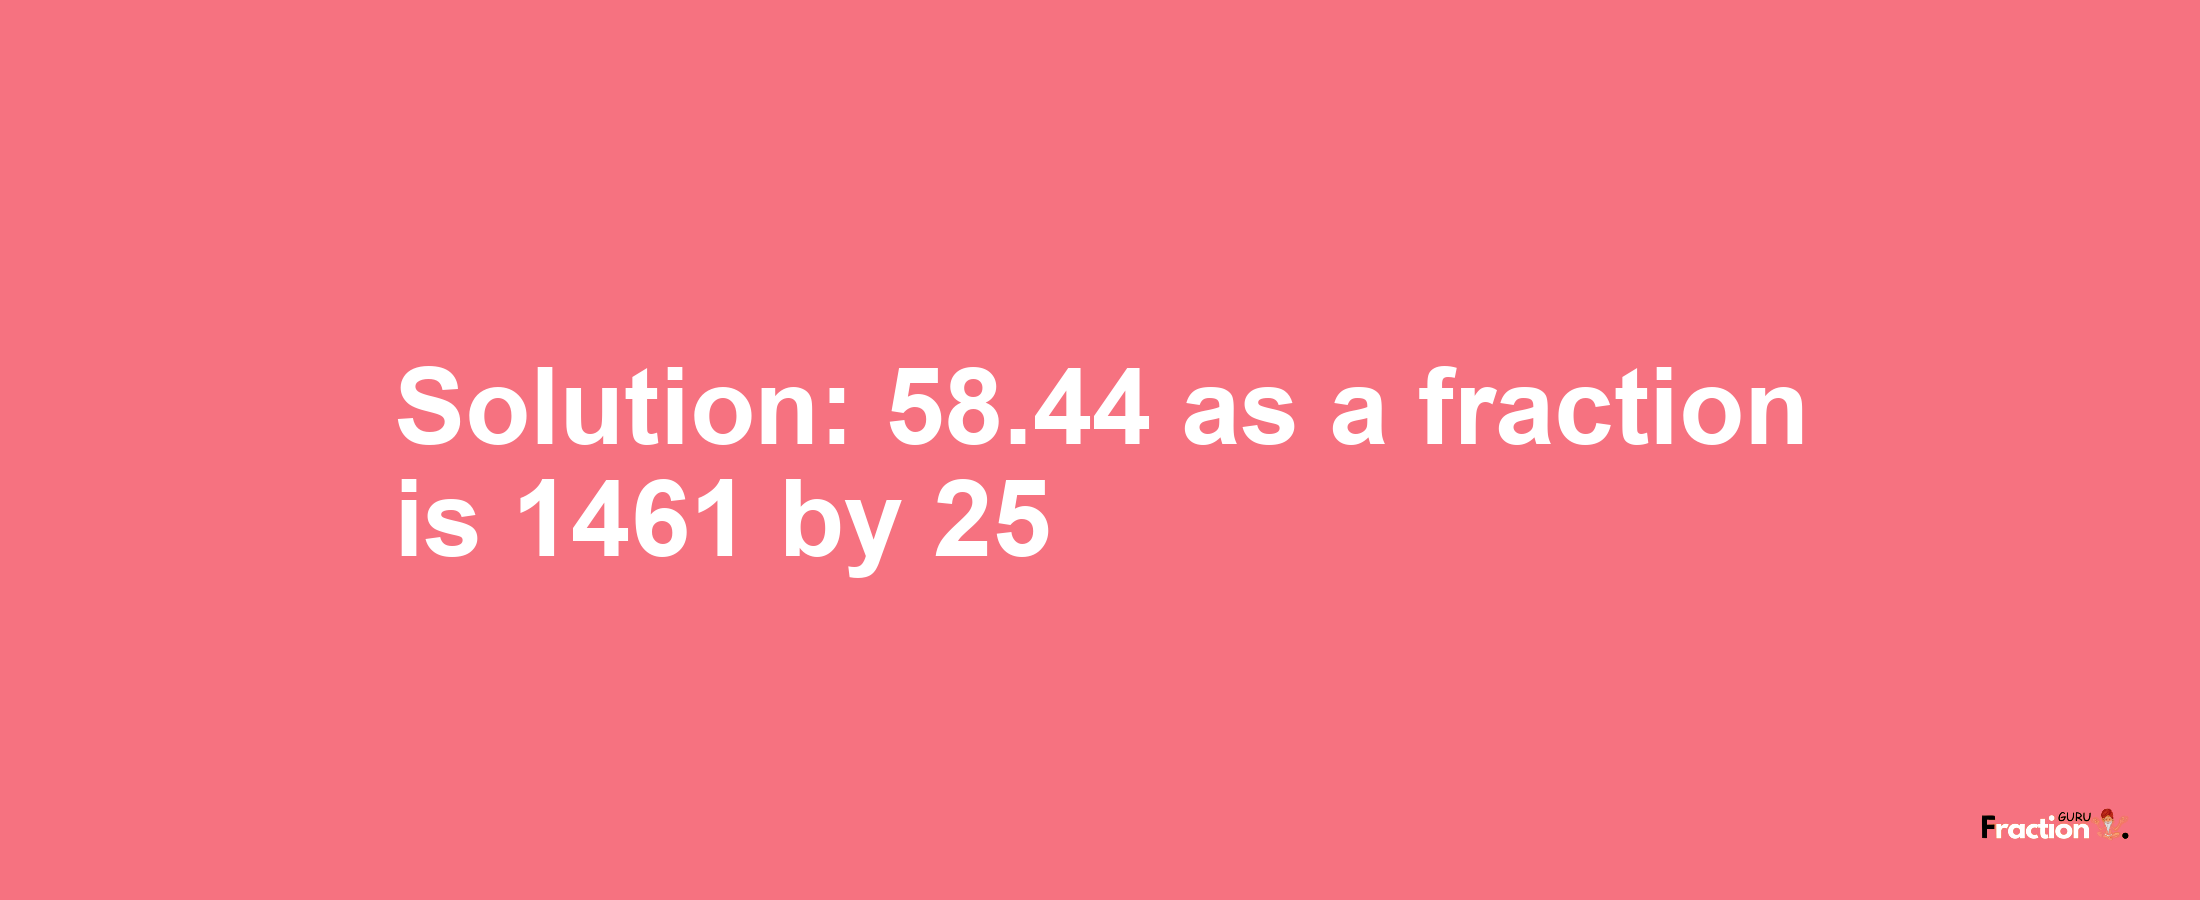 Solution:58.44 as a fraction is 1461/25